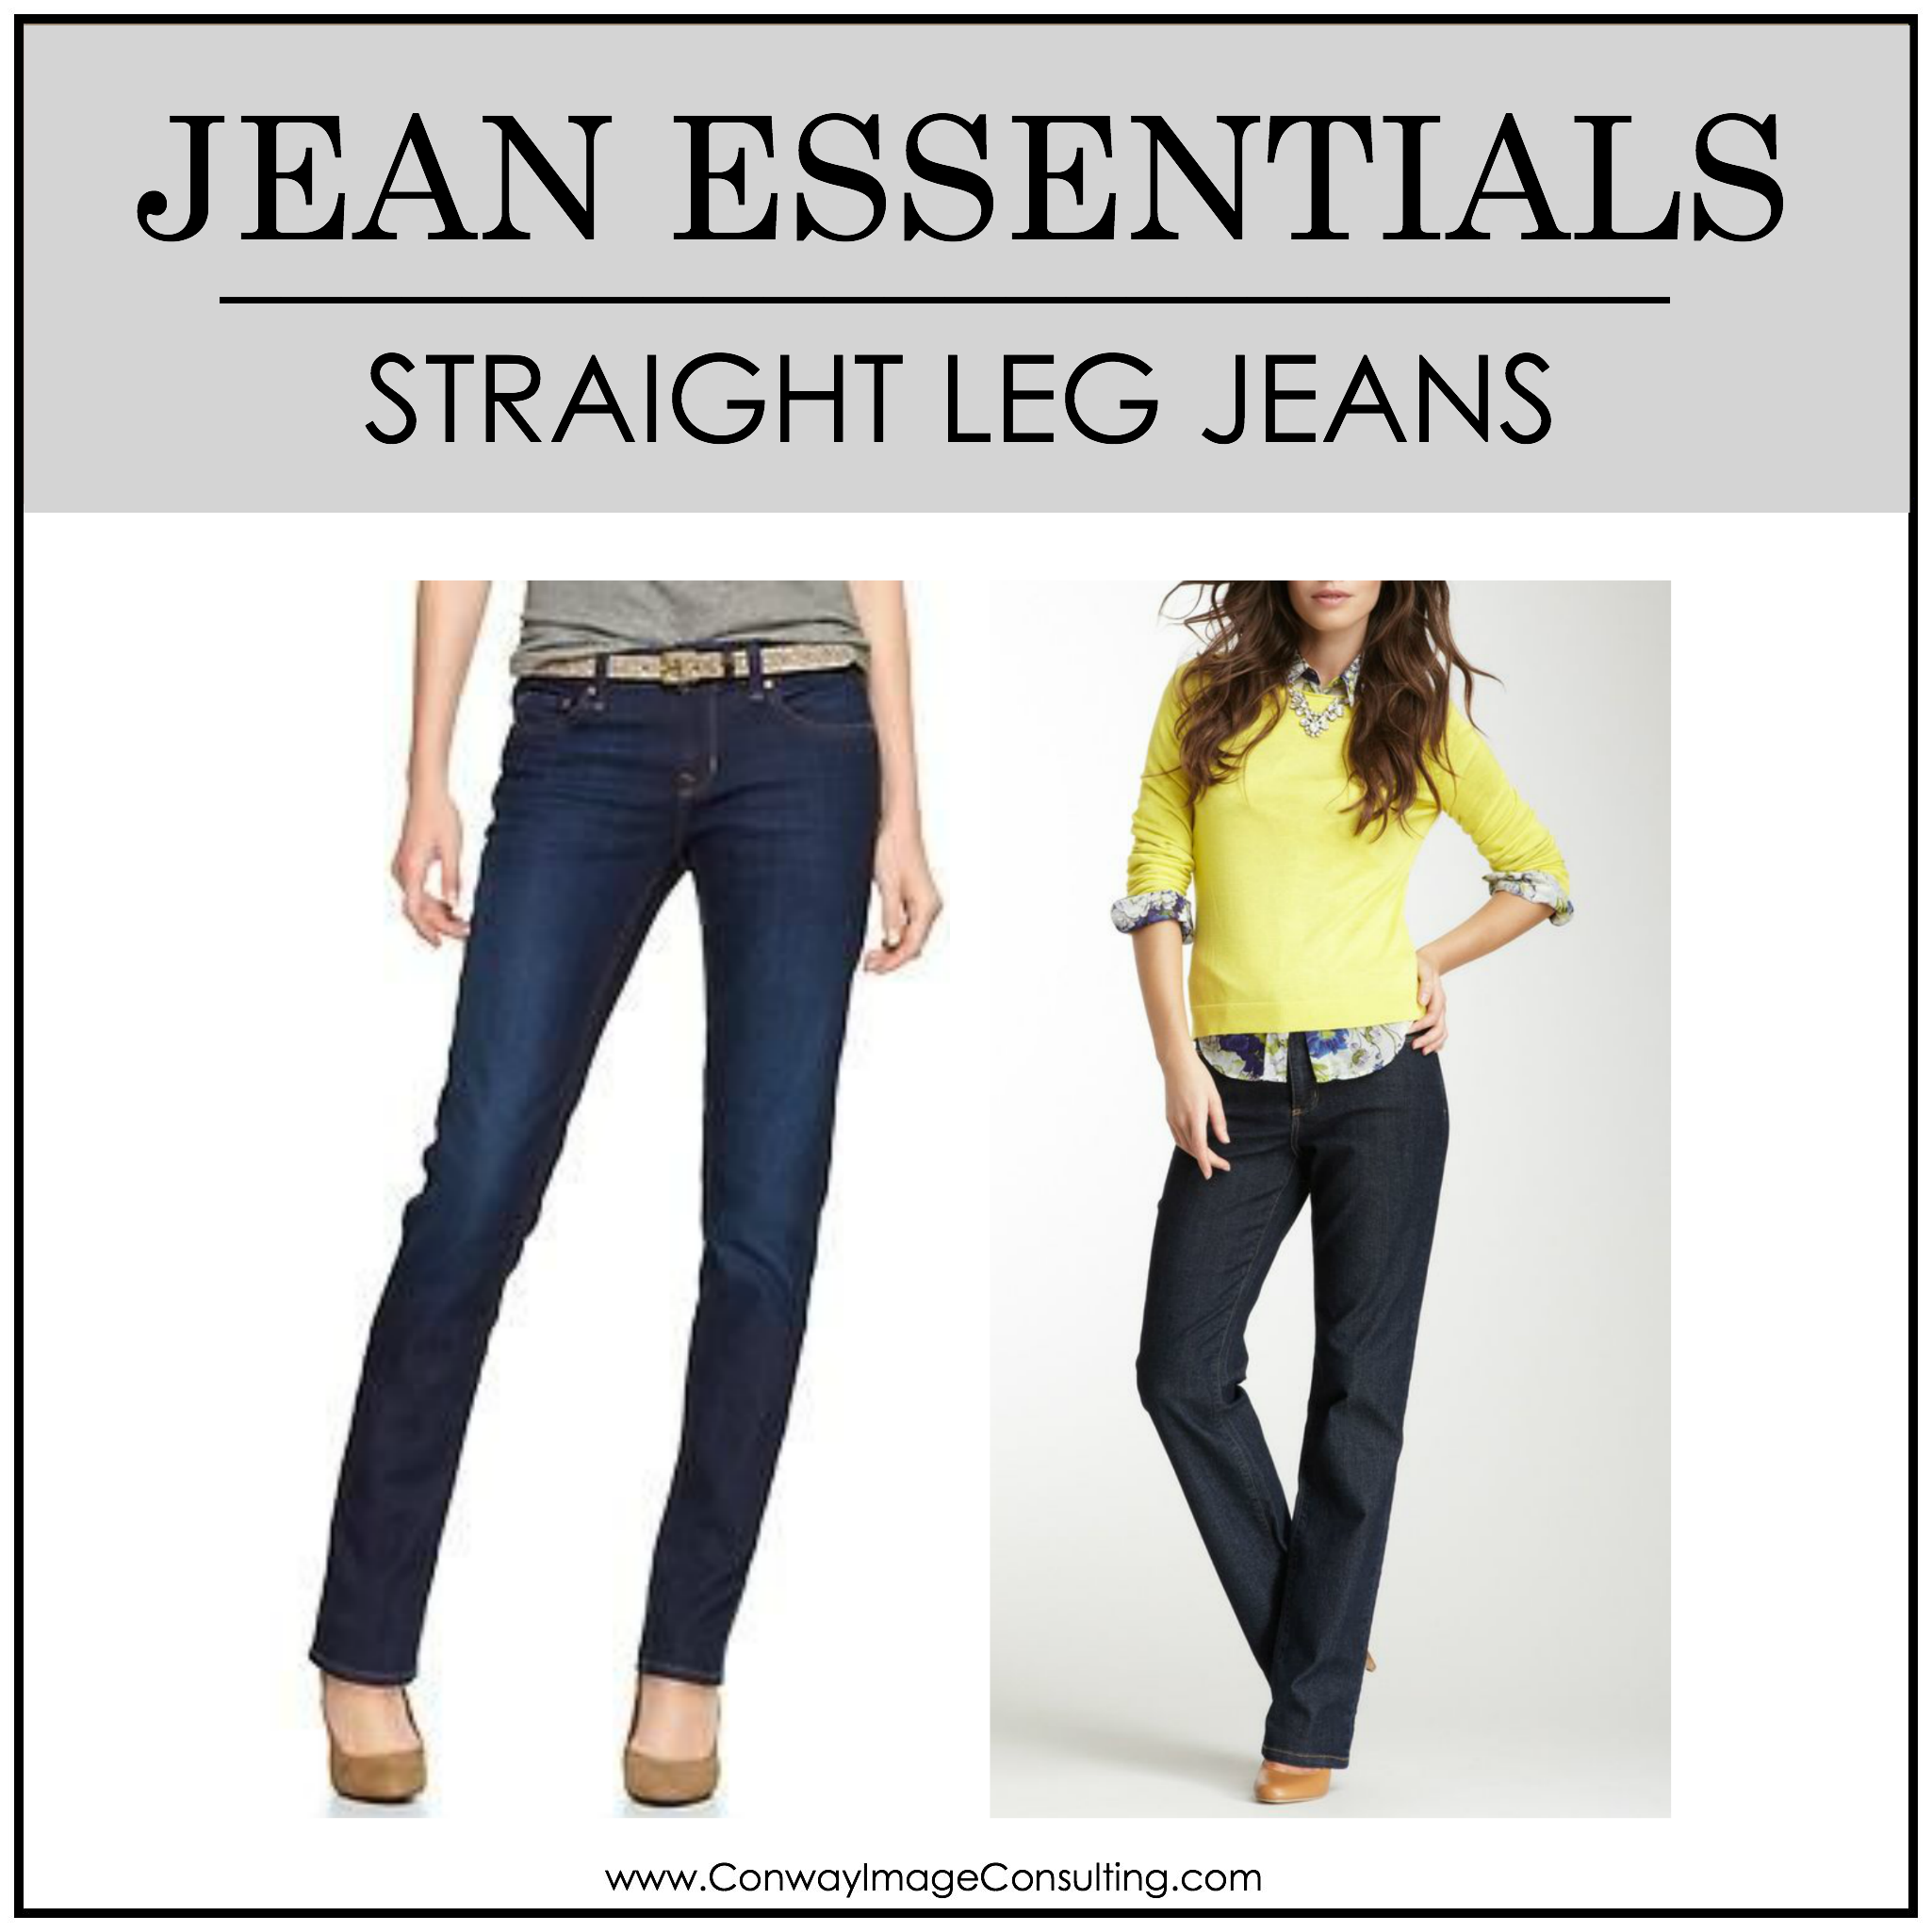 Jean Essentials - Straight Leg Jeans / Conway Image Consulting